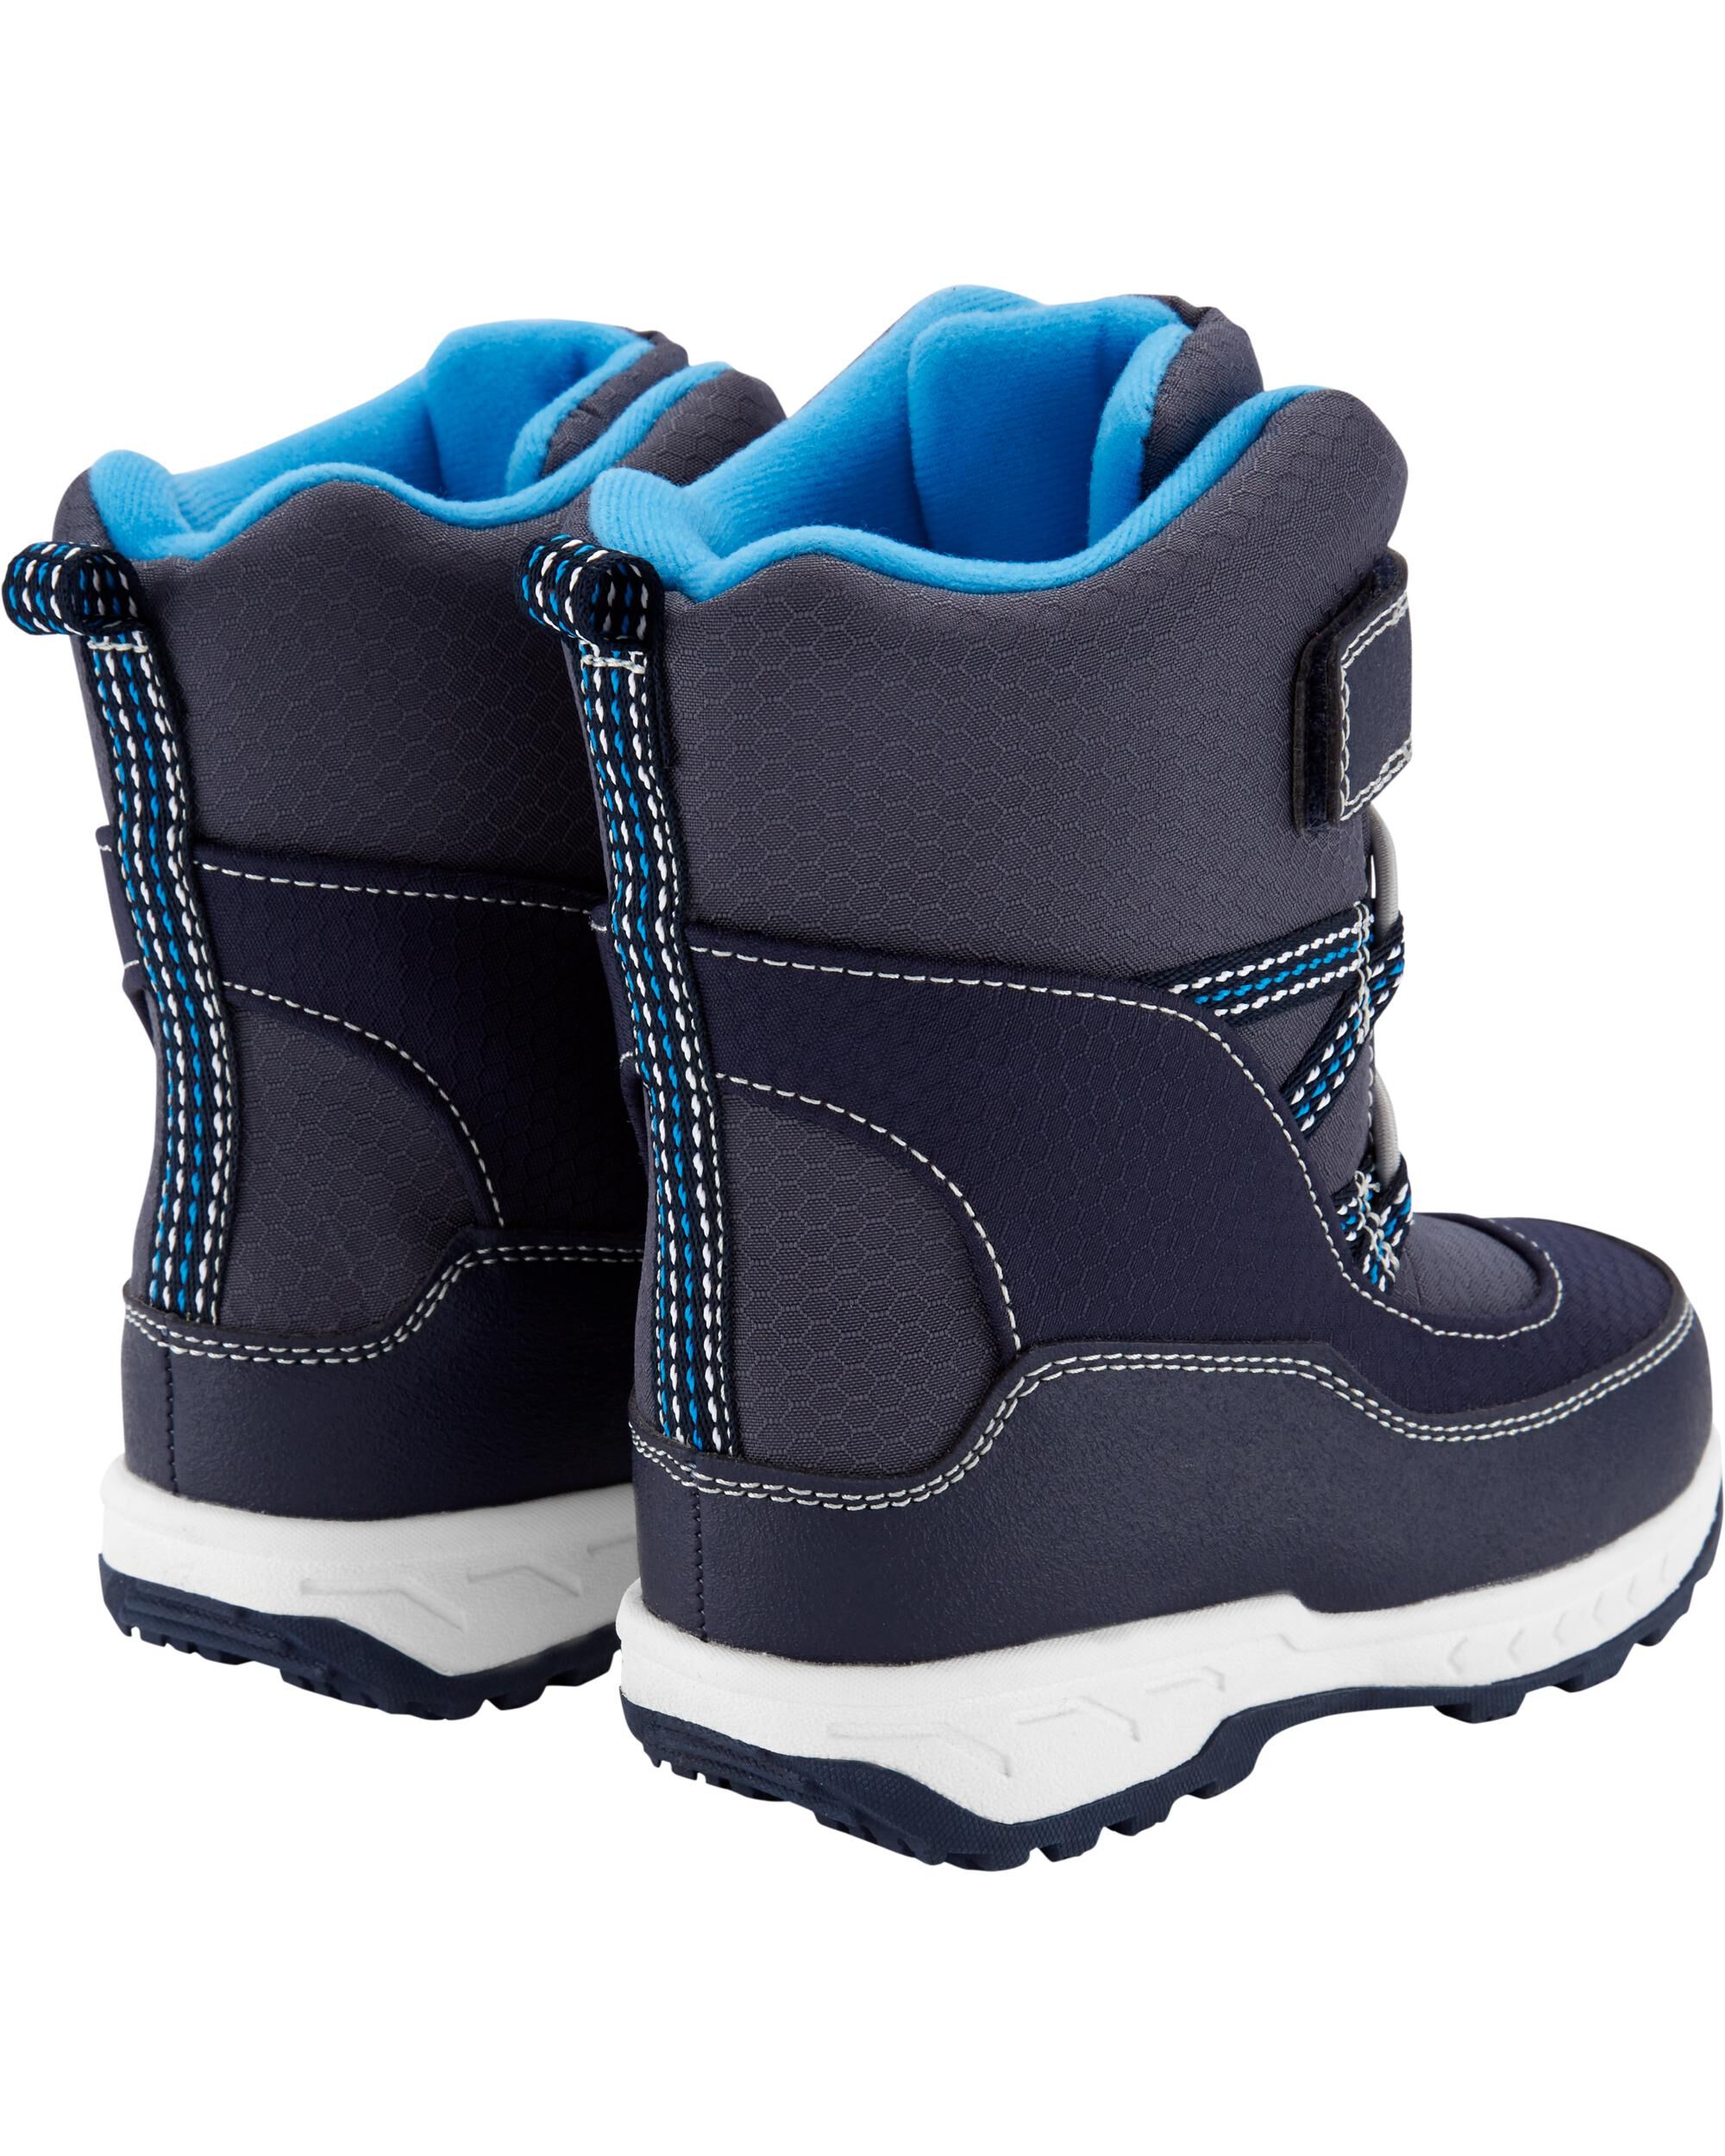 carters snow boots